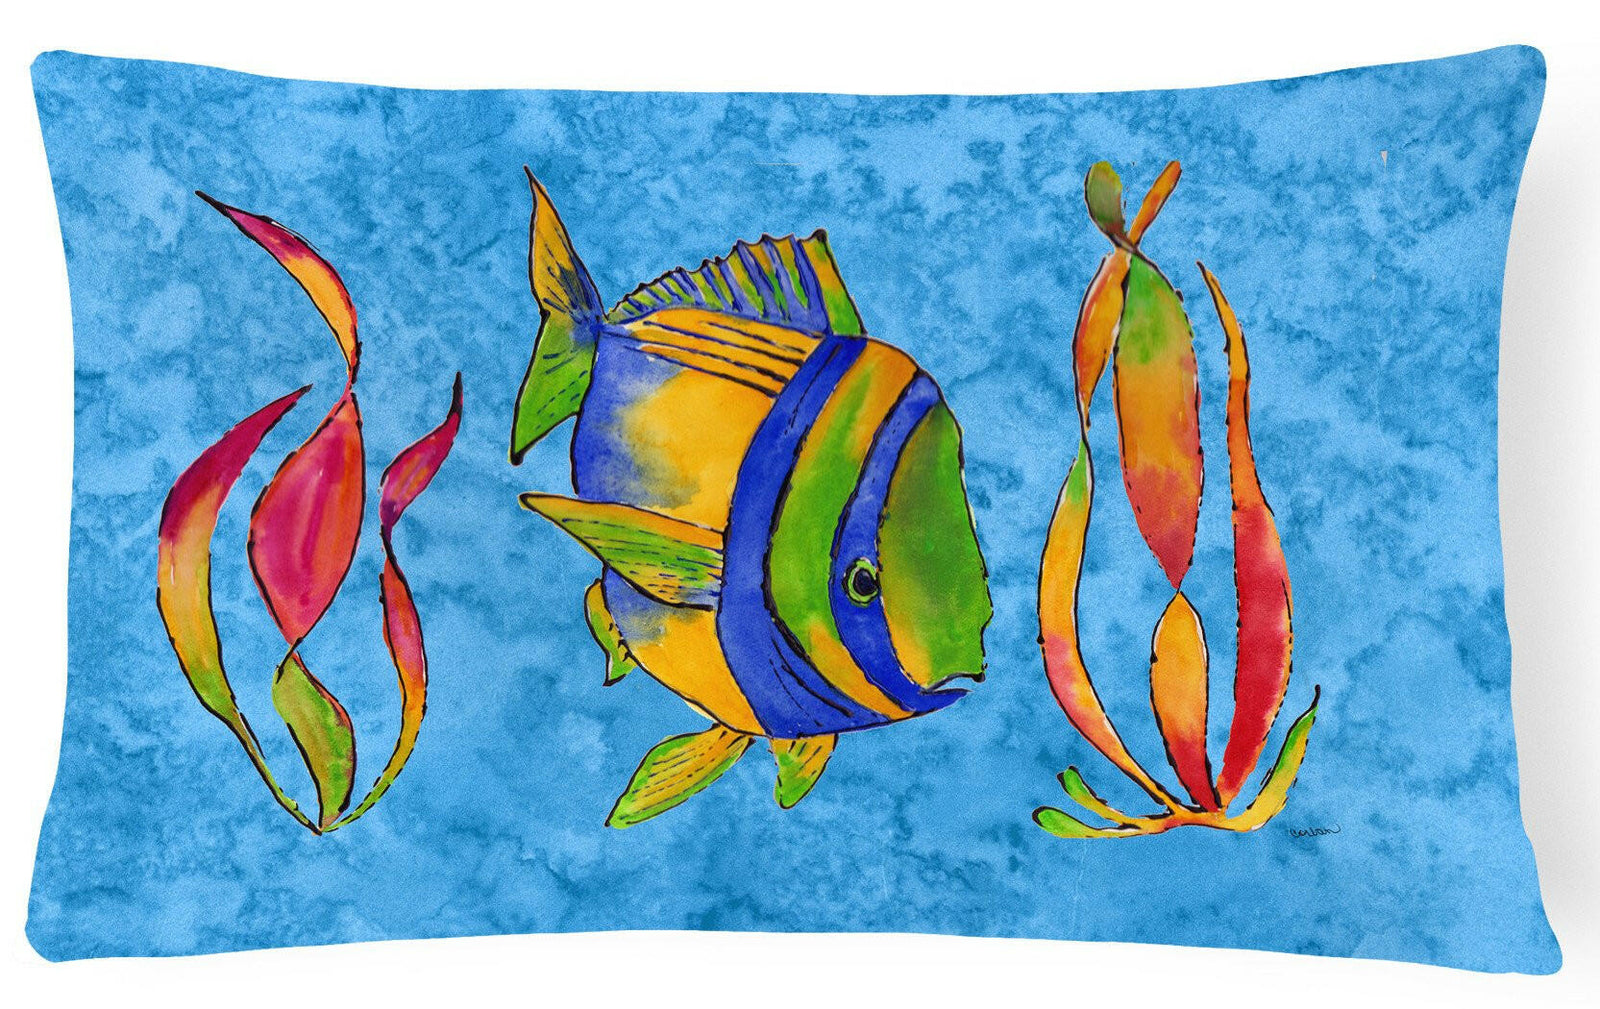 Troical Fish and Seaweed on Blue Canvas Fabric Decorative Pillow 8713PW1216 by Caroline's Treasures